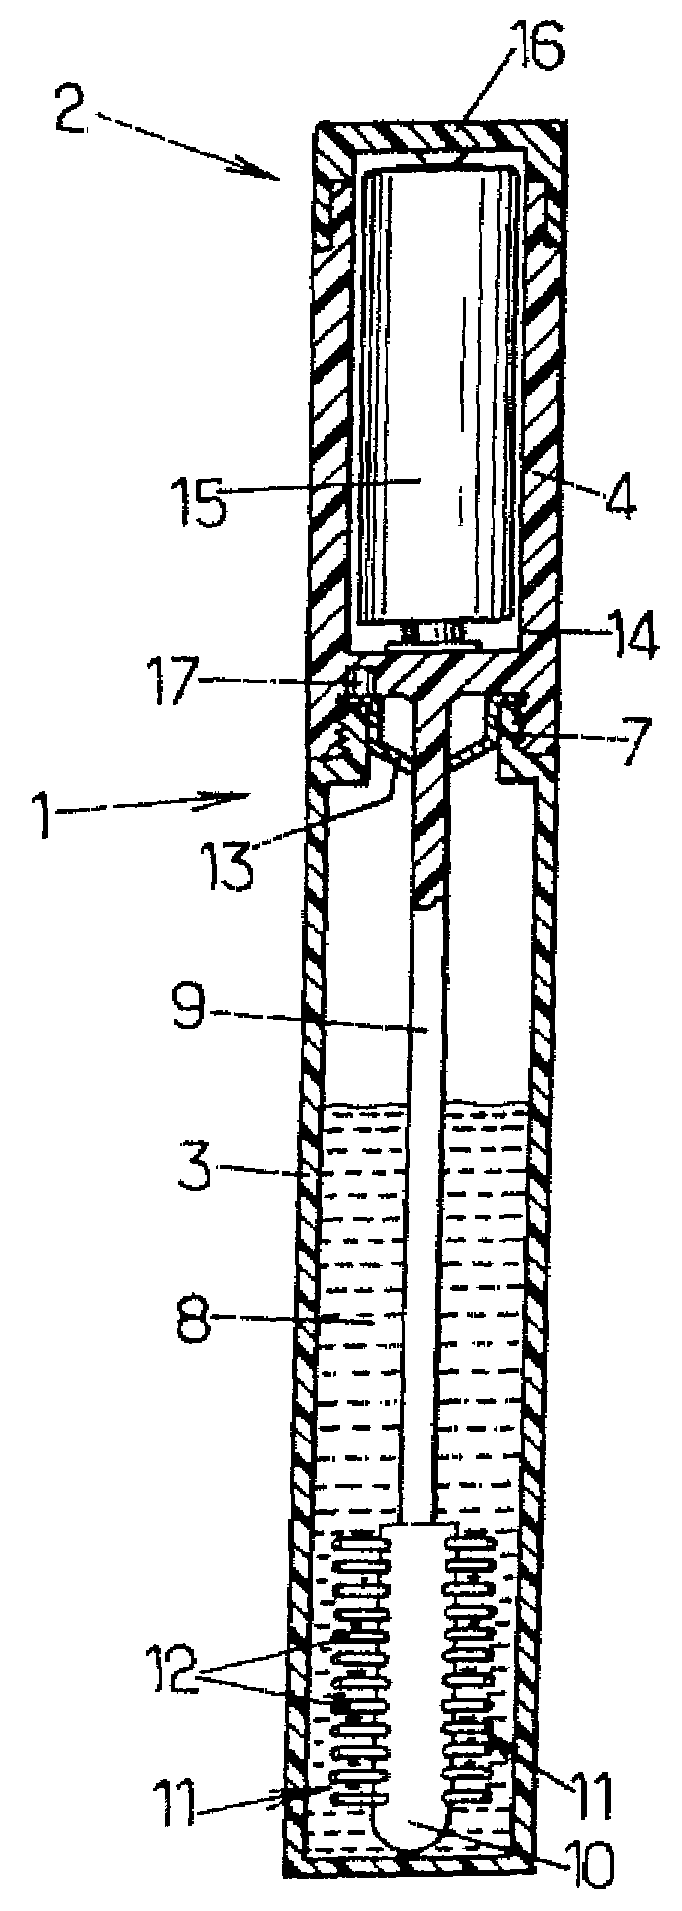 Applicator Device for Applying a Cosmetic and the Use of Such a Device